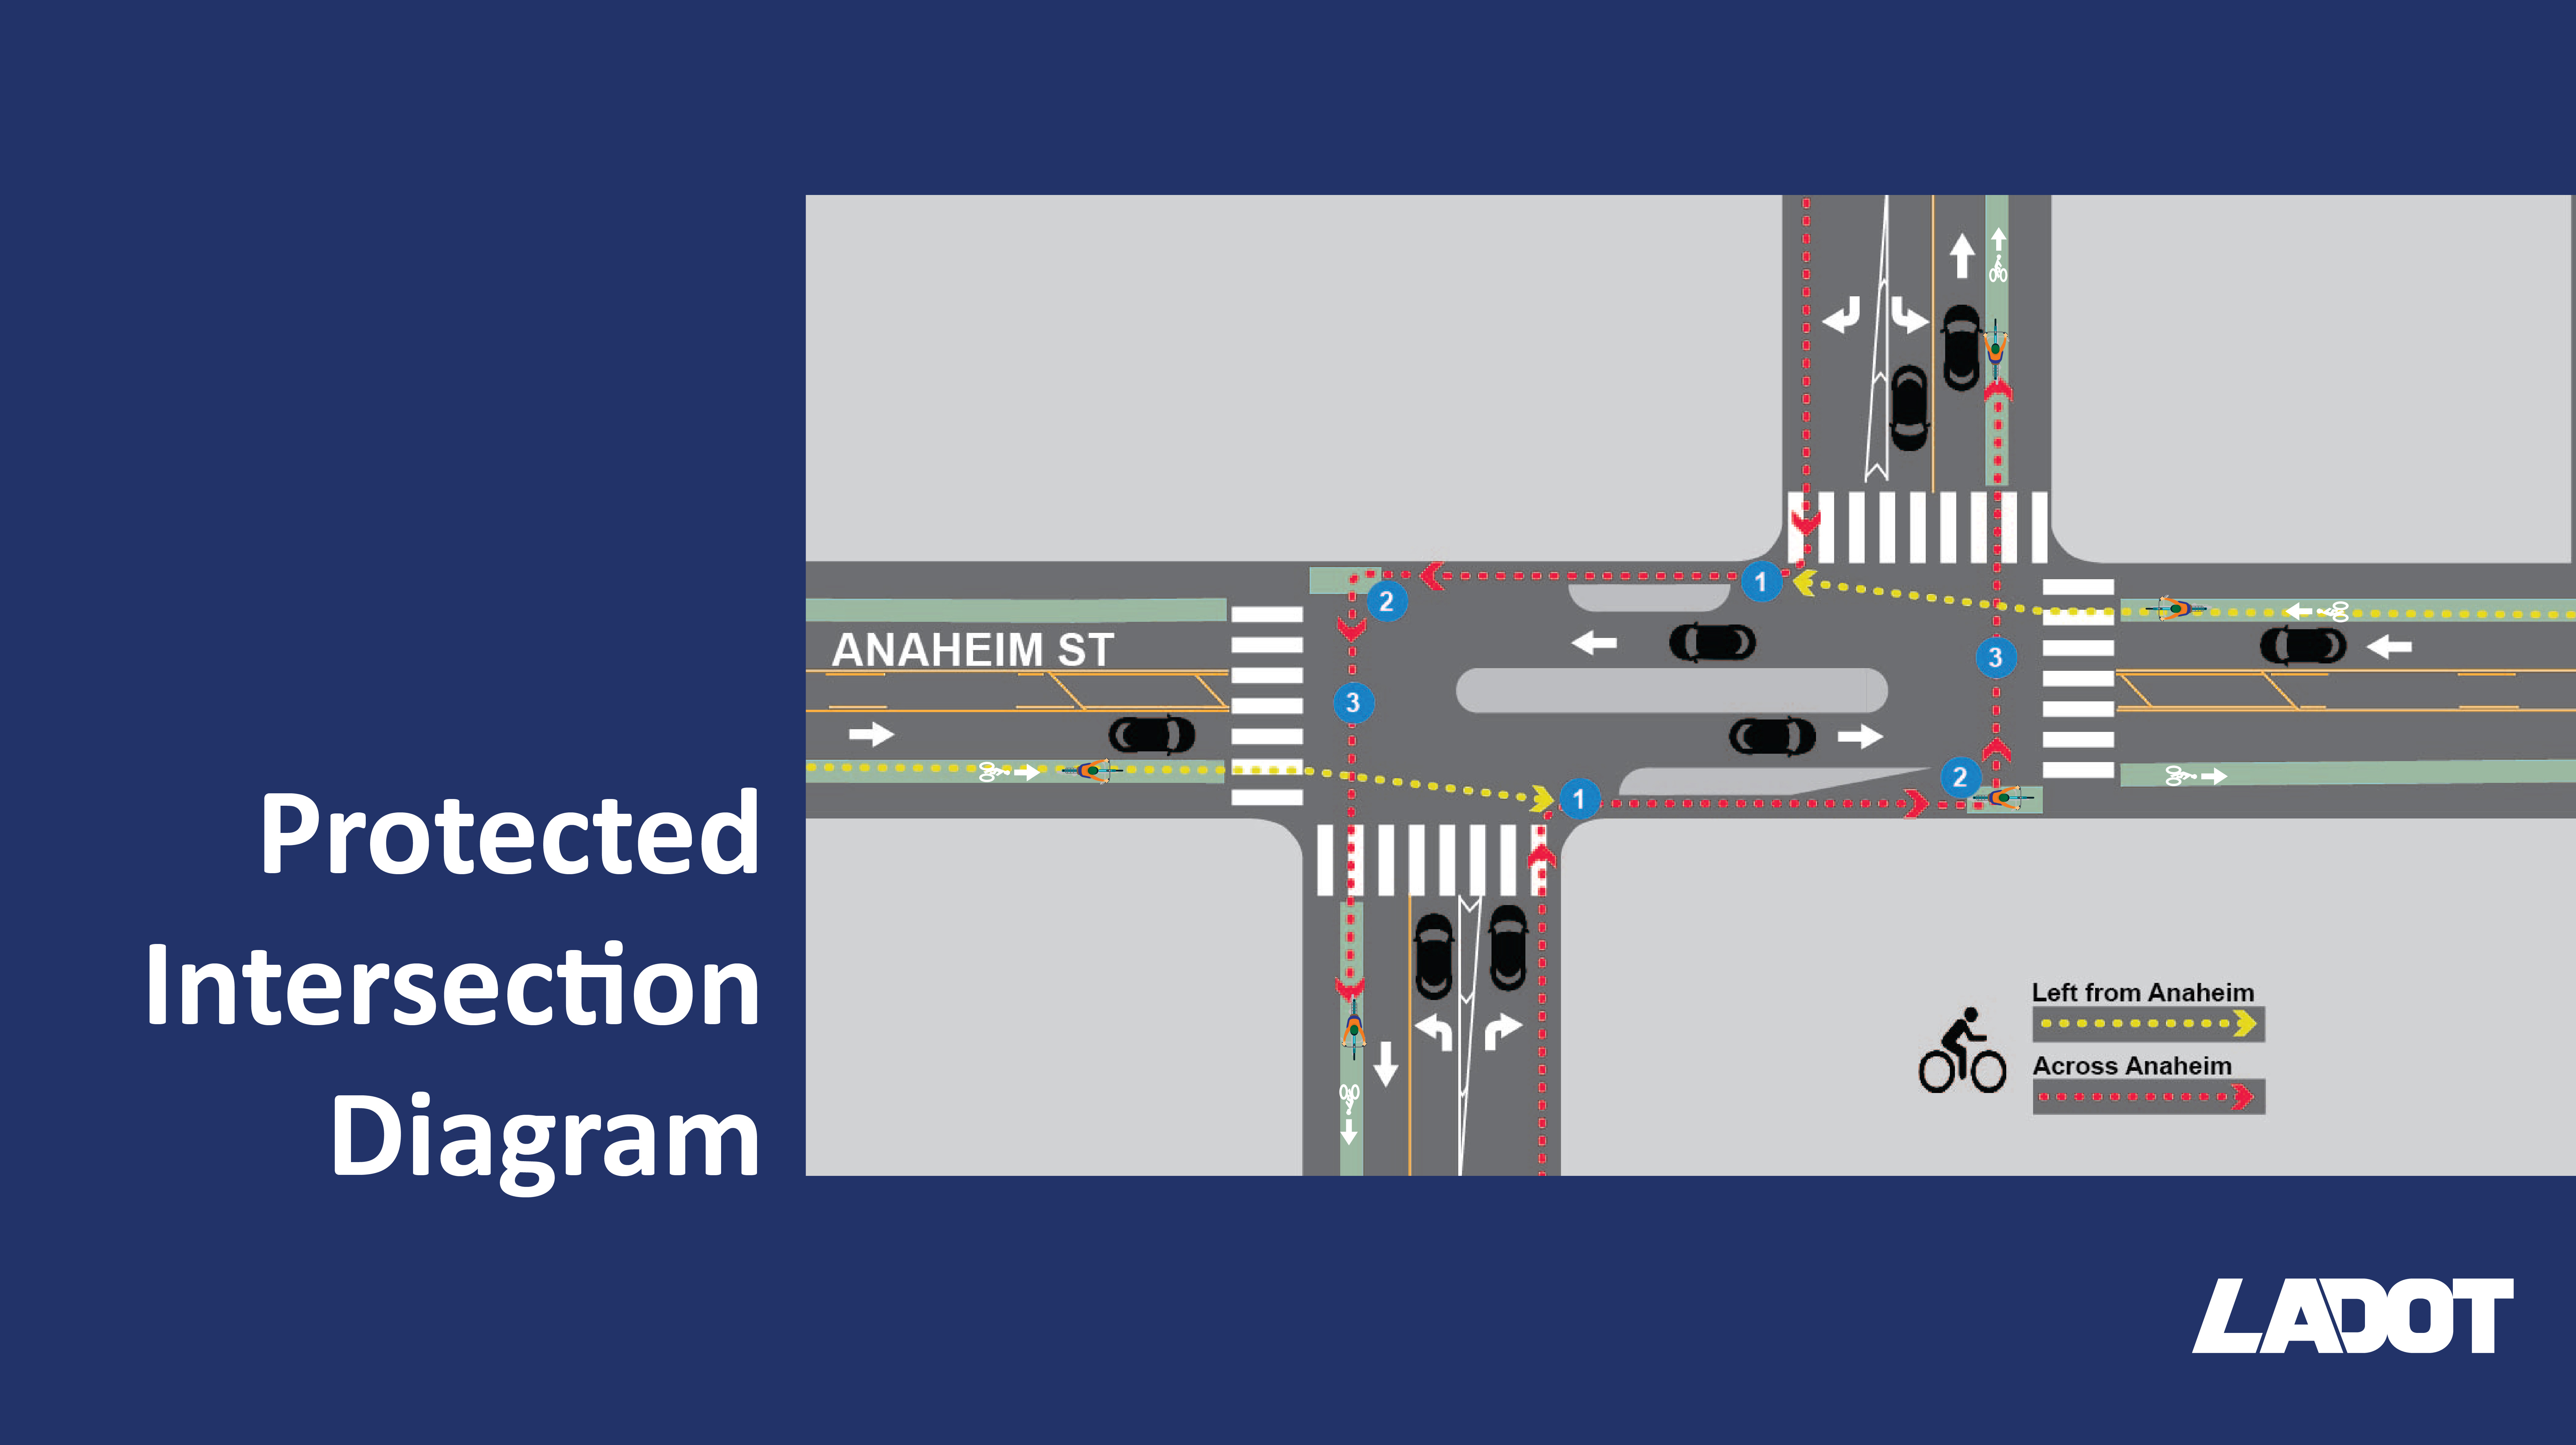 Protected Intersection Diagram (Anaheim at Broad Ave)